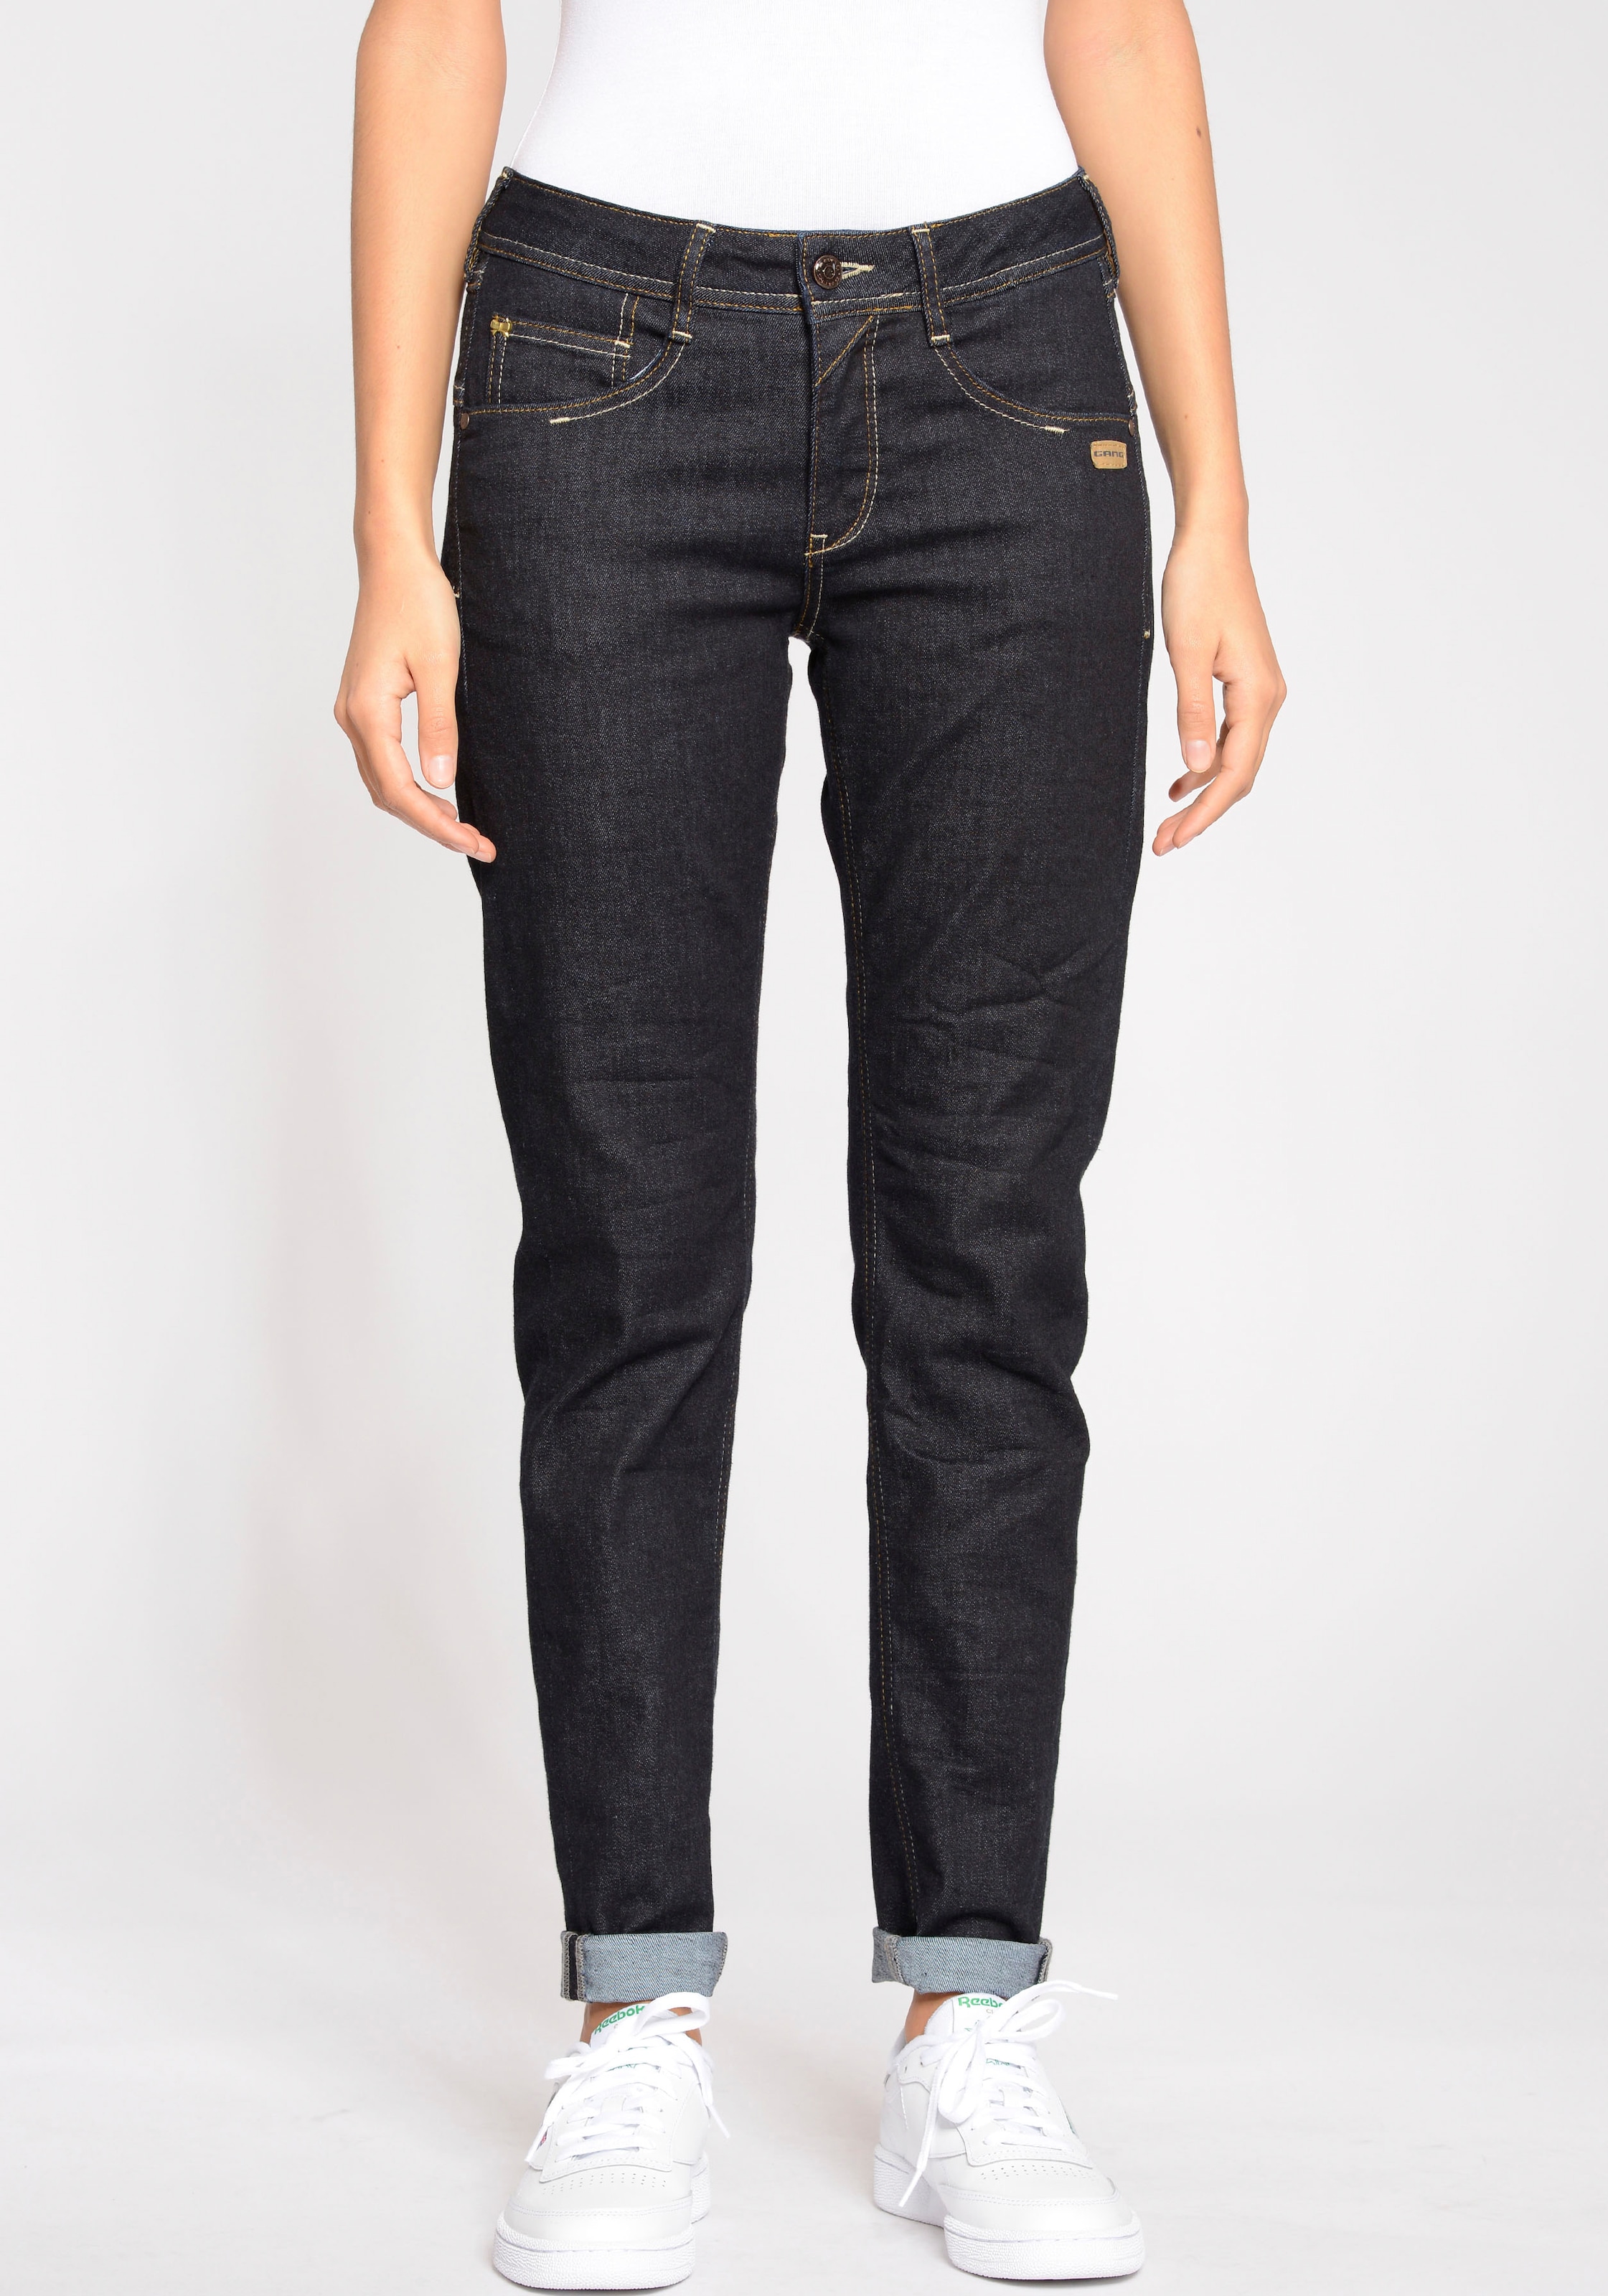 Shop Online Relax-fit-Jeans Fit«, Relaxed OTTO im mit »94Amelie Used-Effekten GANG